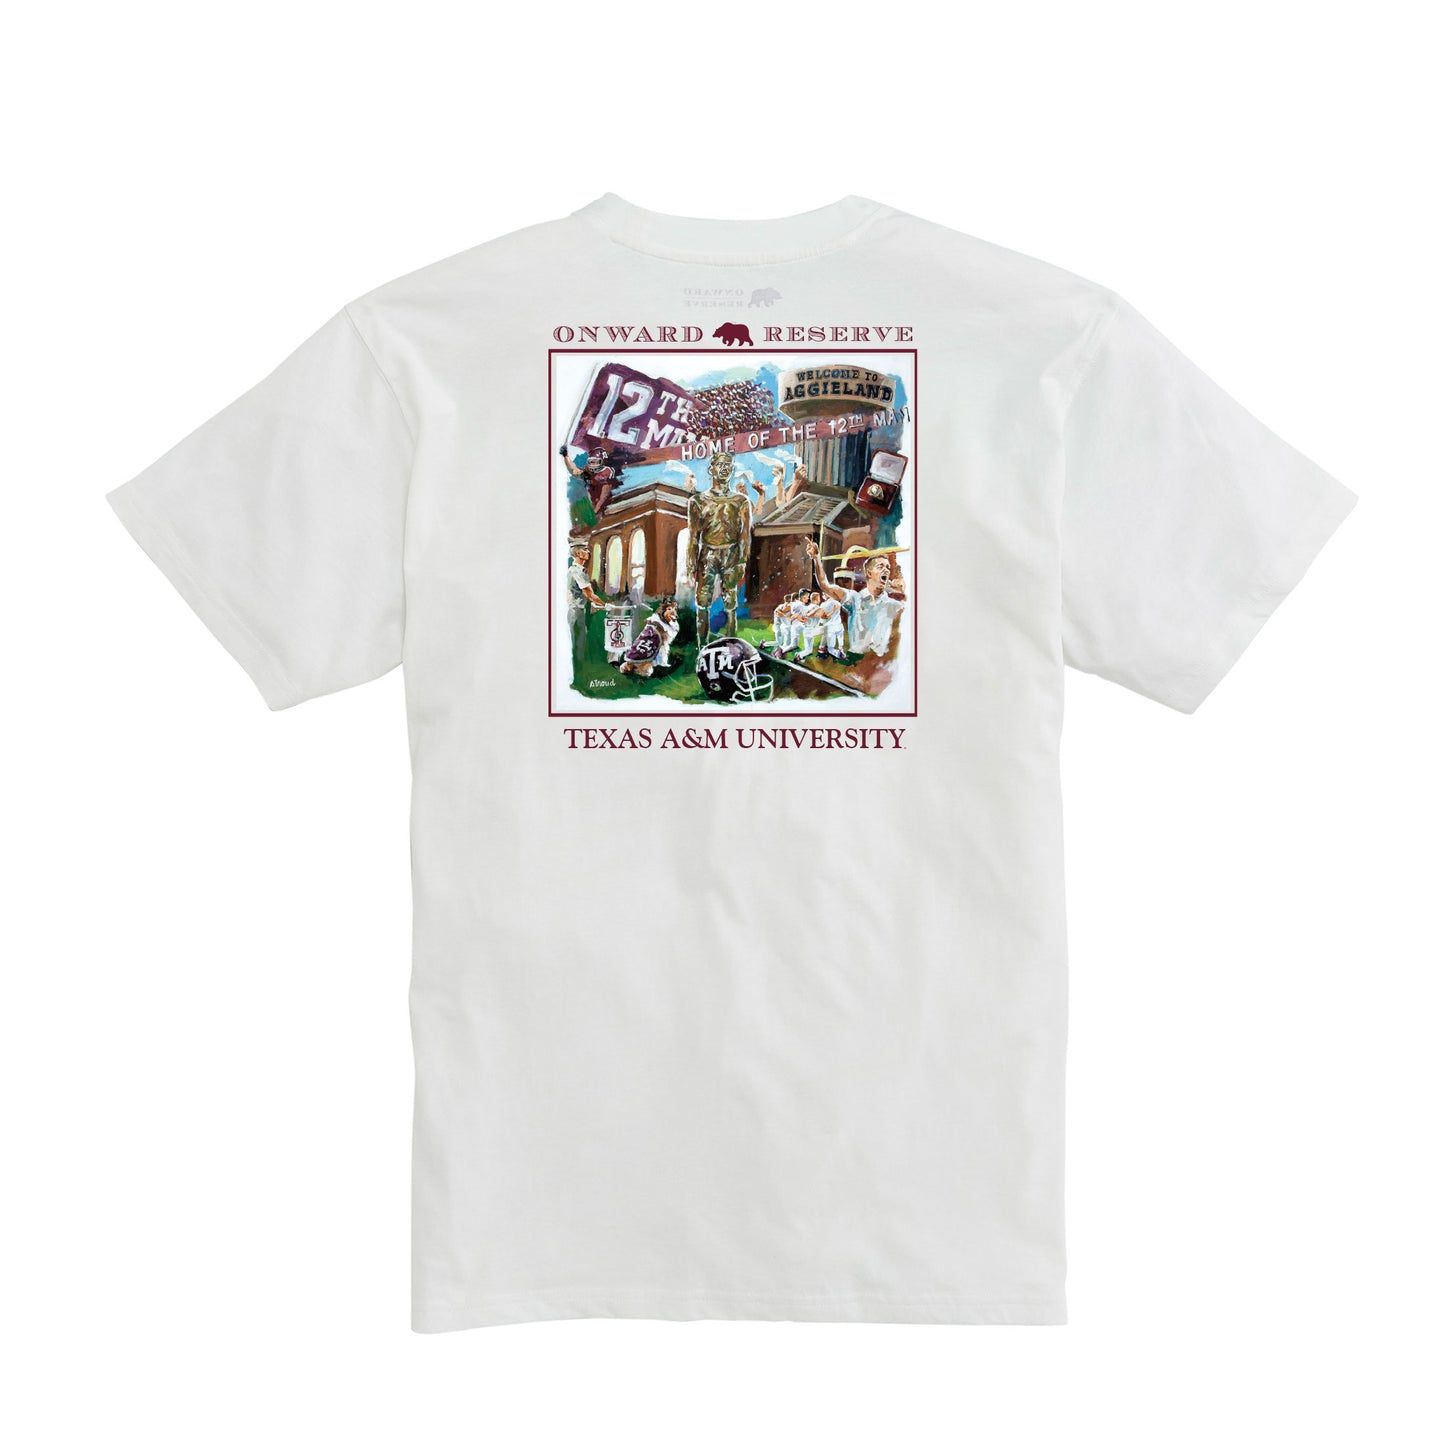 Texas A&M Collage Tee